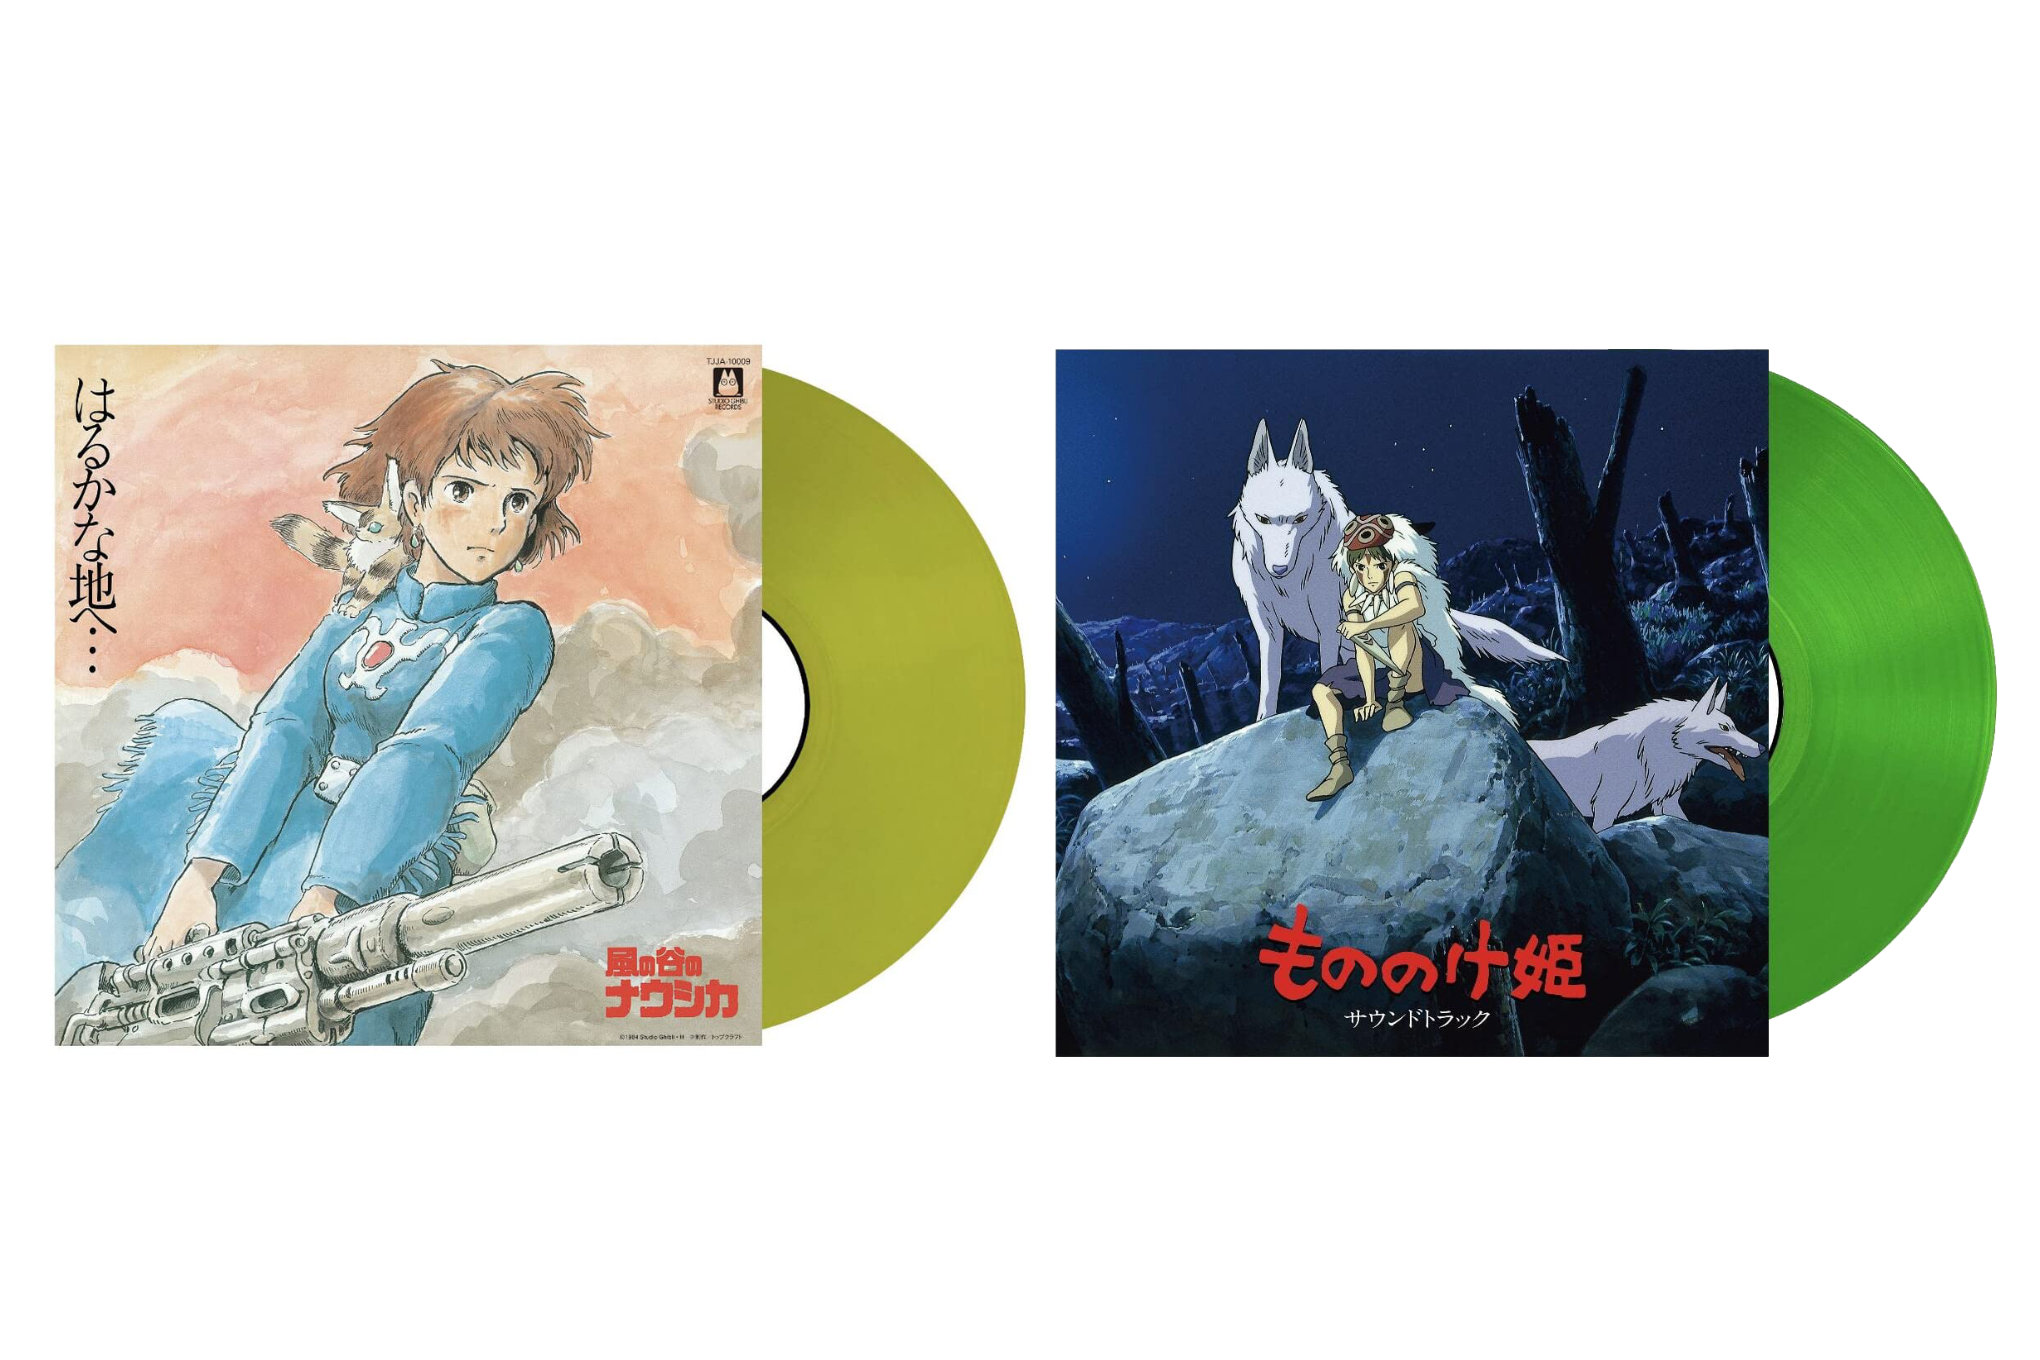 An image of two LP covers for Studio Ghibli Records, with Nausicaa Of The Valley Of Wind on the left and Princess Mononoke on the right. Both LP covers feature illustrations of the movies’ titular heroines